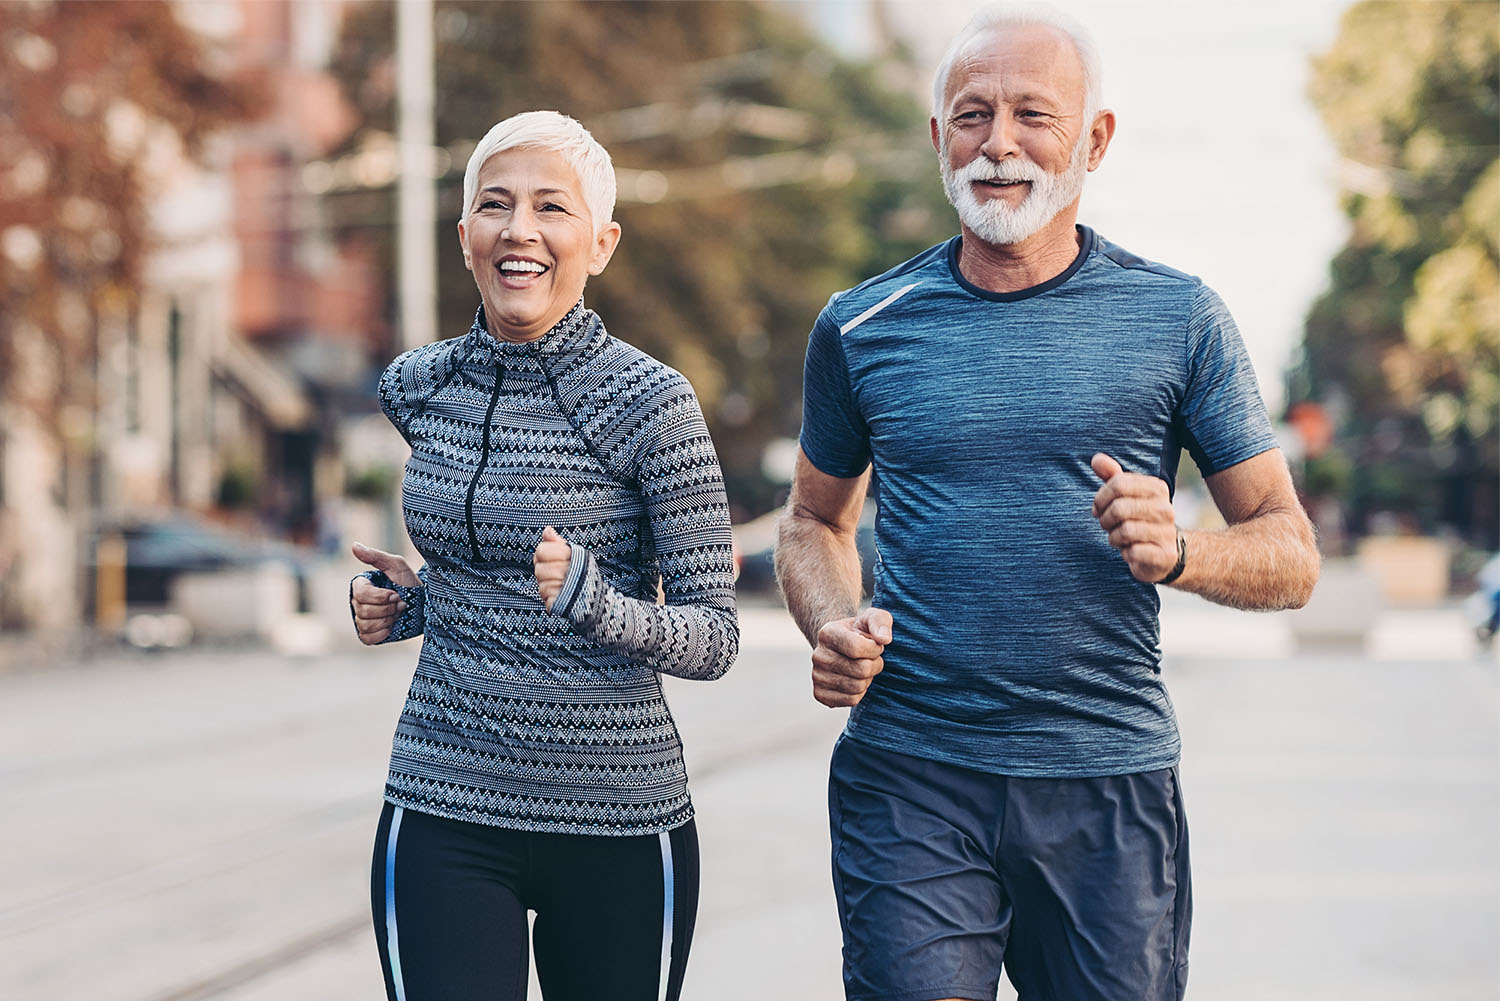 Study: How Cardio Fitness, Exercise Counteract Cognitive Decline